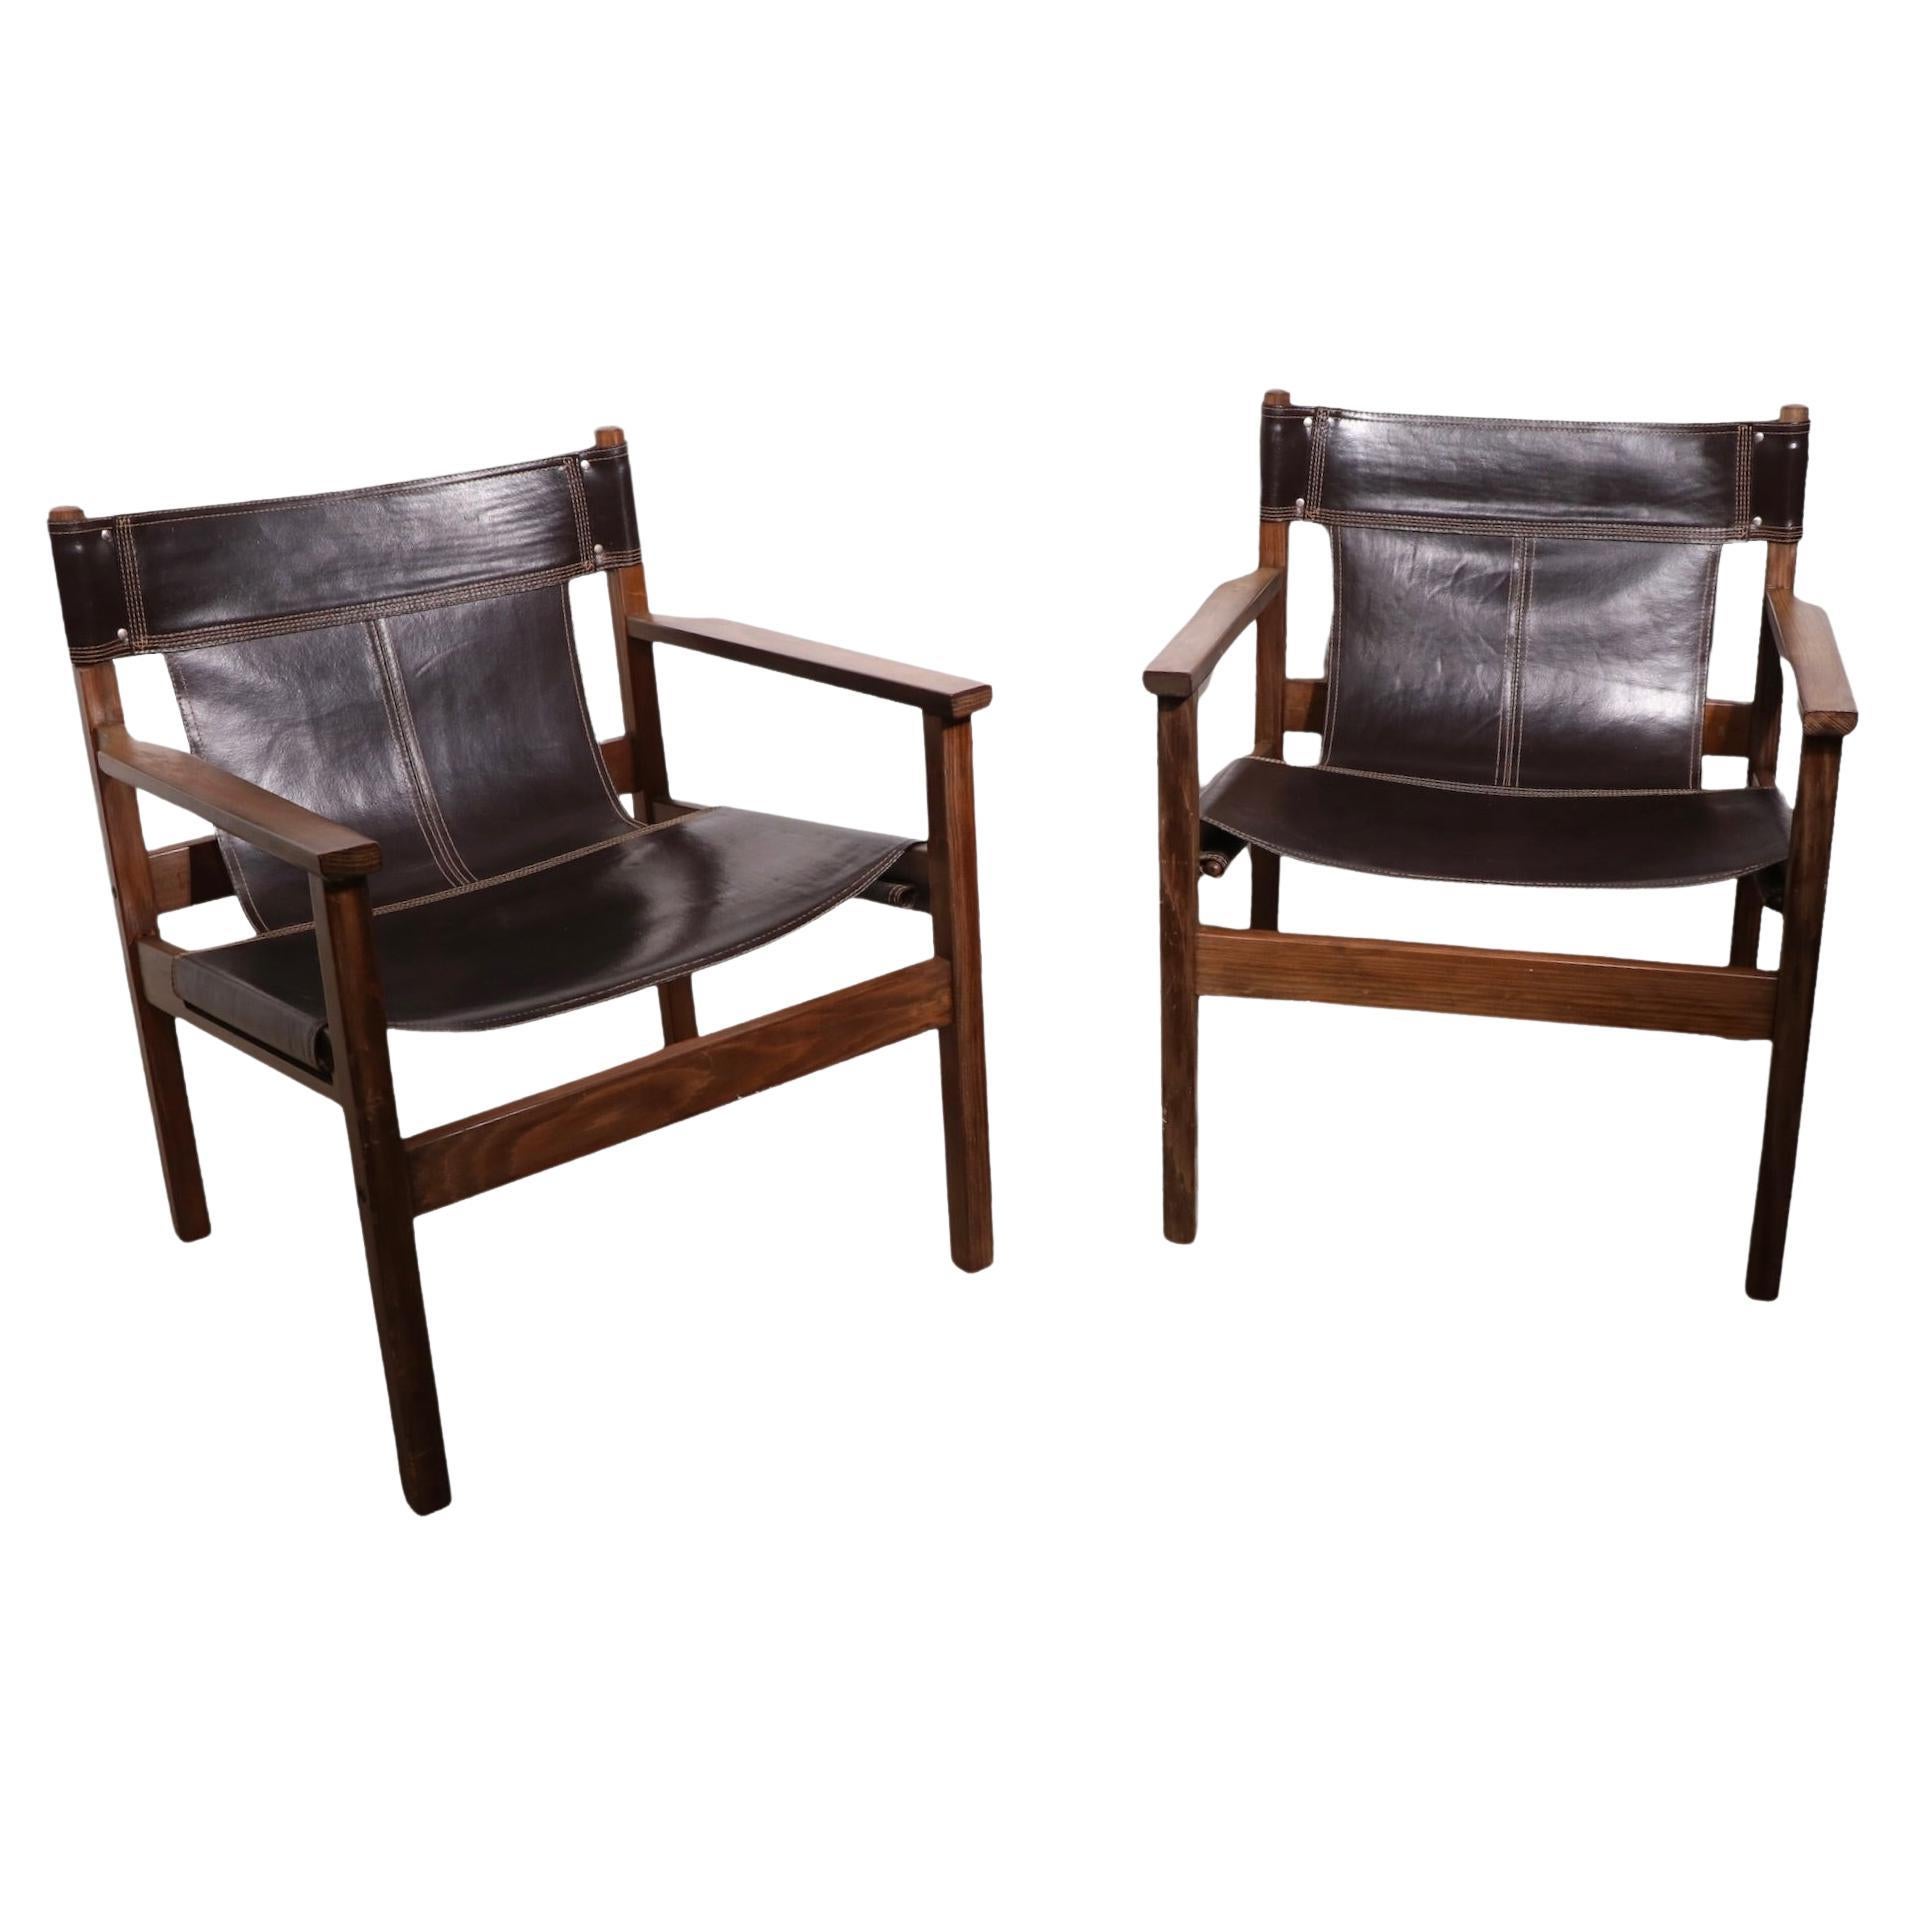 Chic pair of mid-century safari chairs, in original brown leather and wood. Both chairs are in very fine, original, clean and ready to use condition. Hard to find nice vintage pairs still intact. Design reminiscent of Michael Arnoult, unsigned. 
